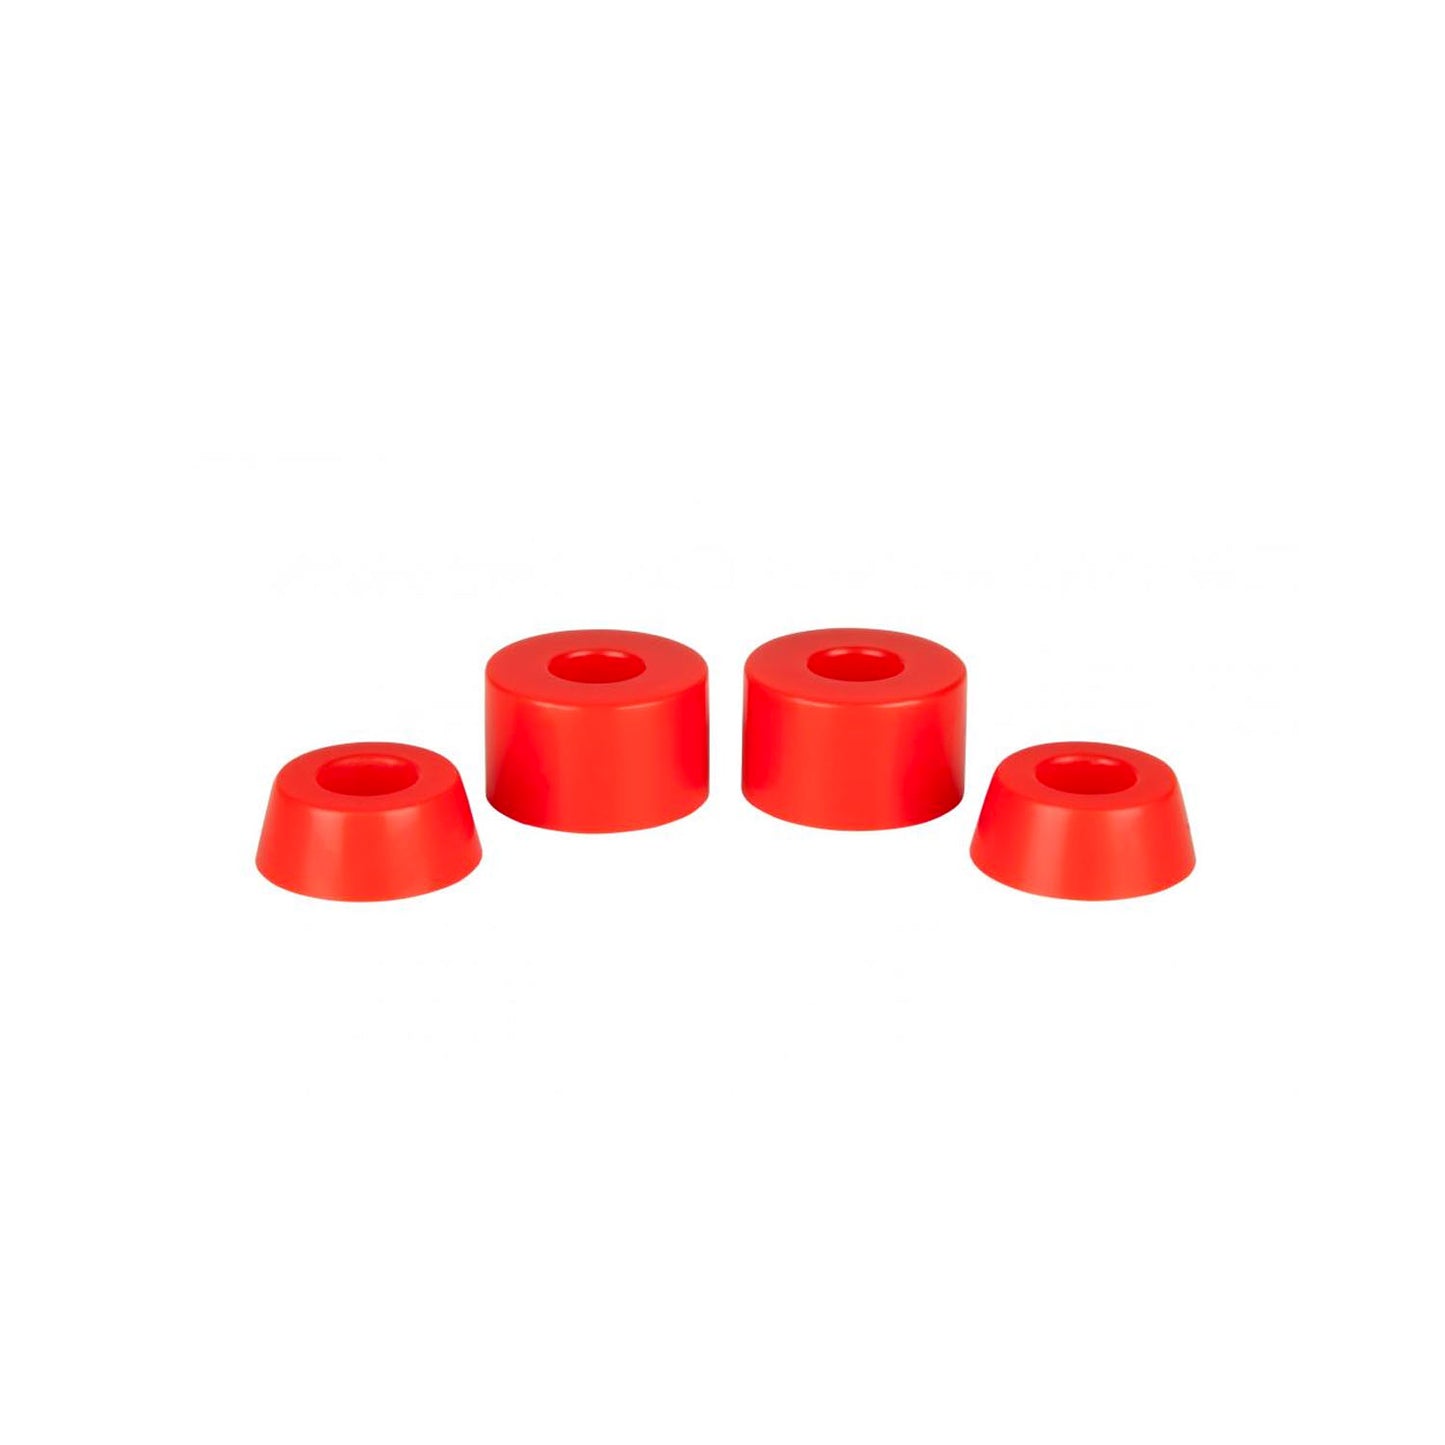 Sushi Bushings Medium 90A (Pack 4) - Red - Prime Delux Store